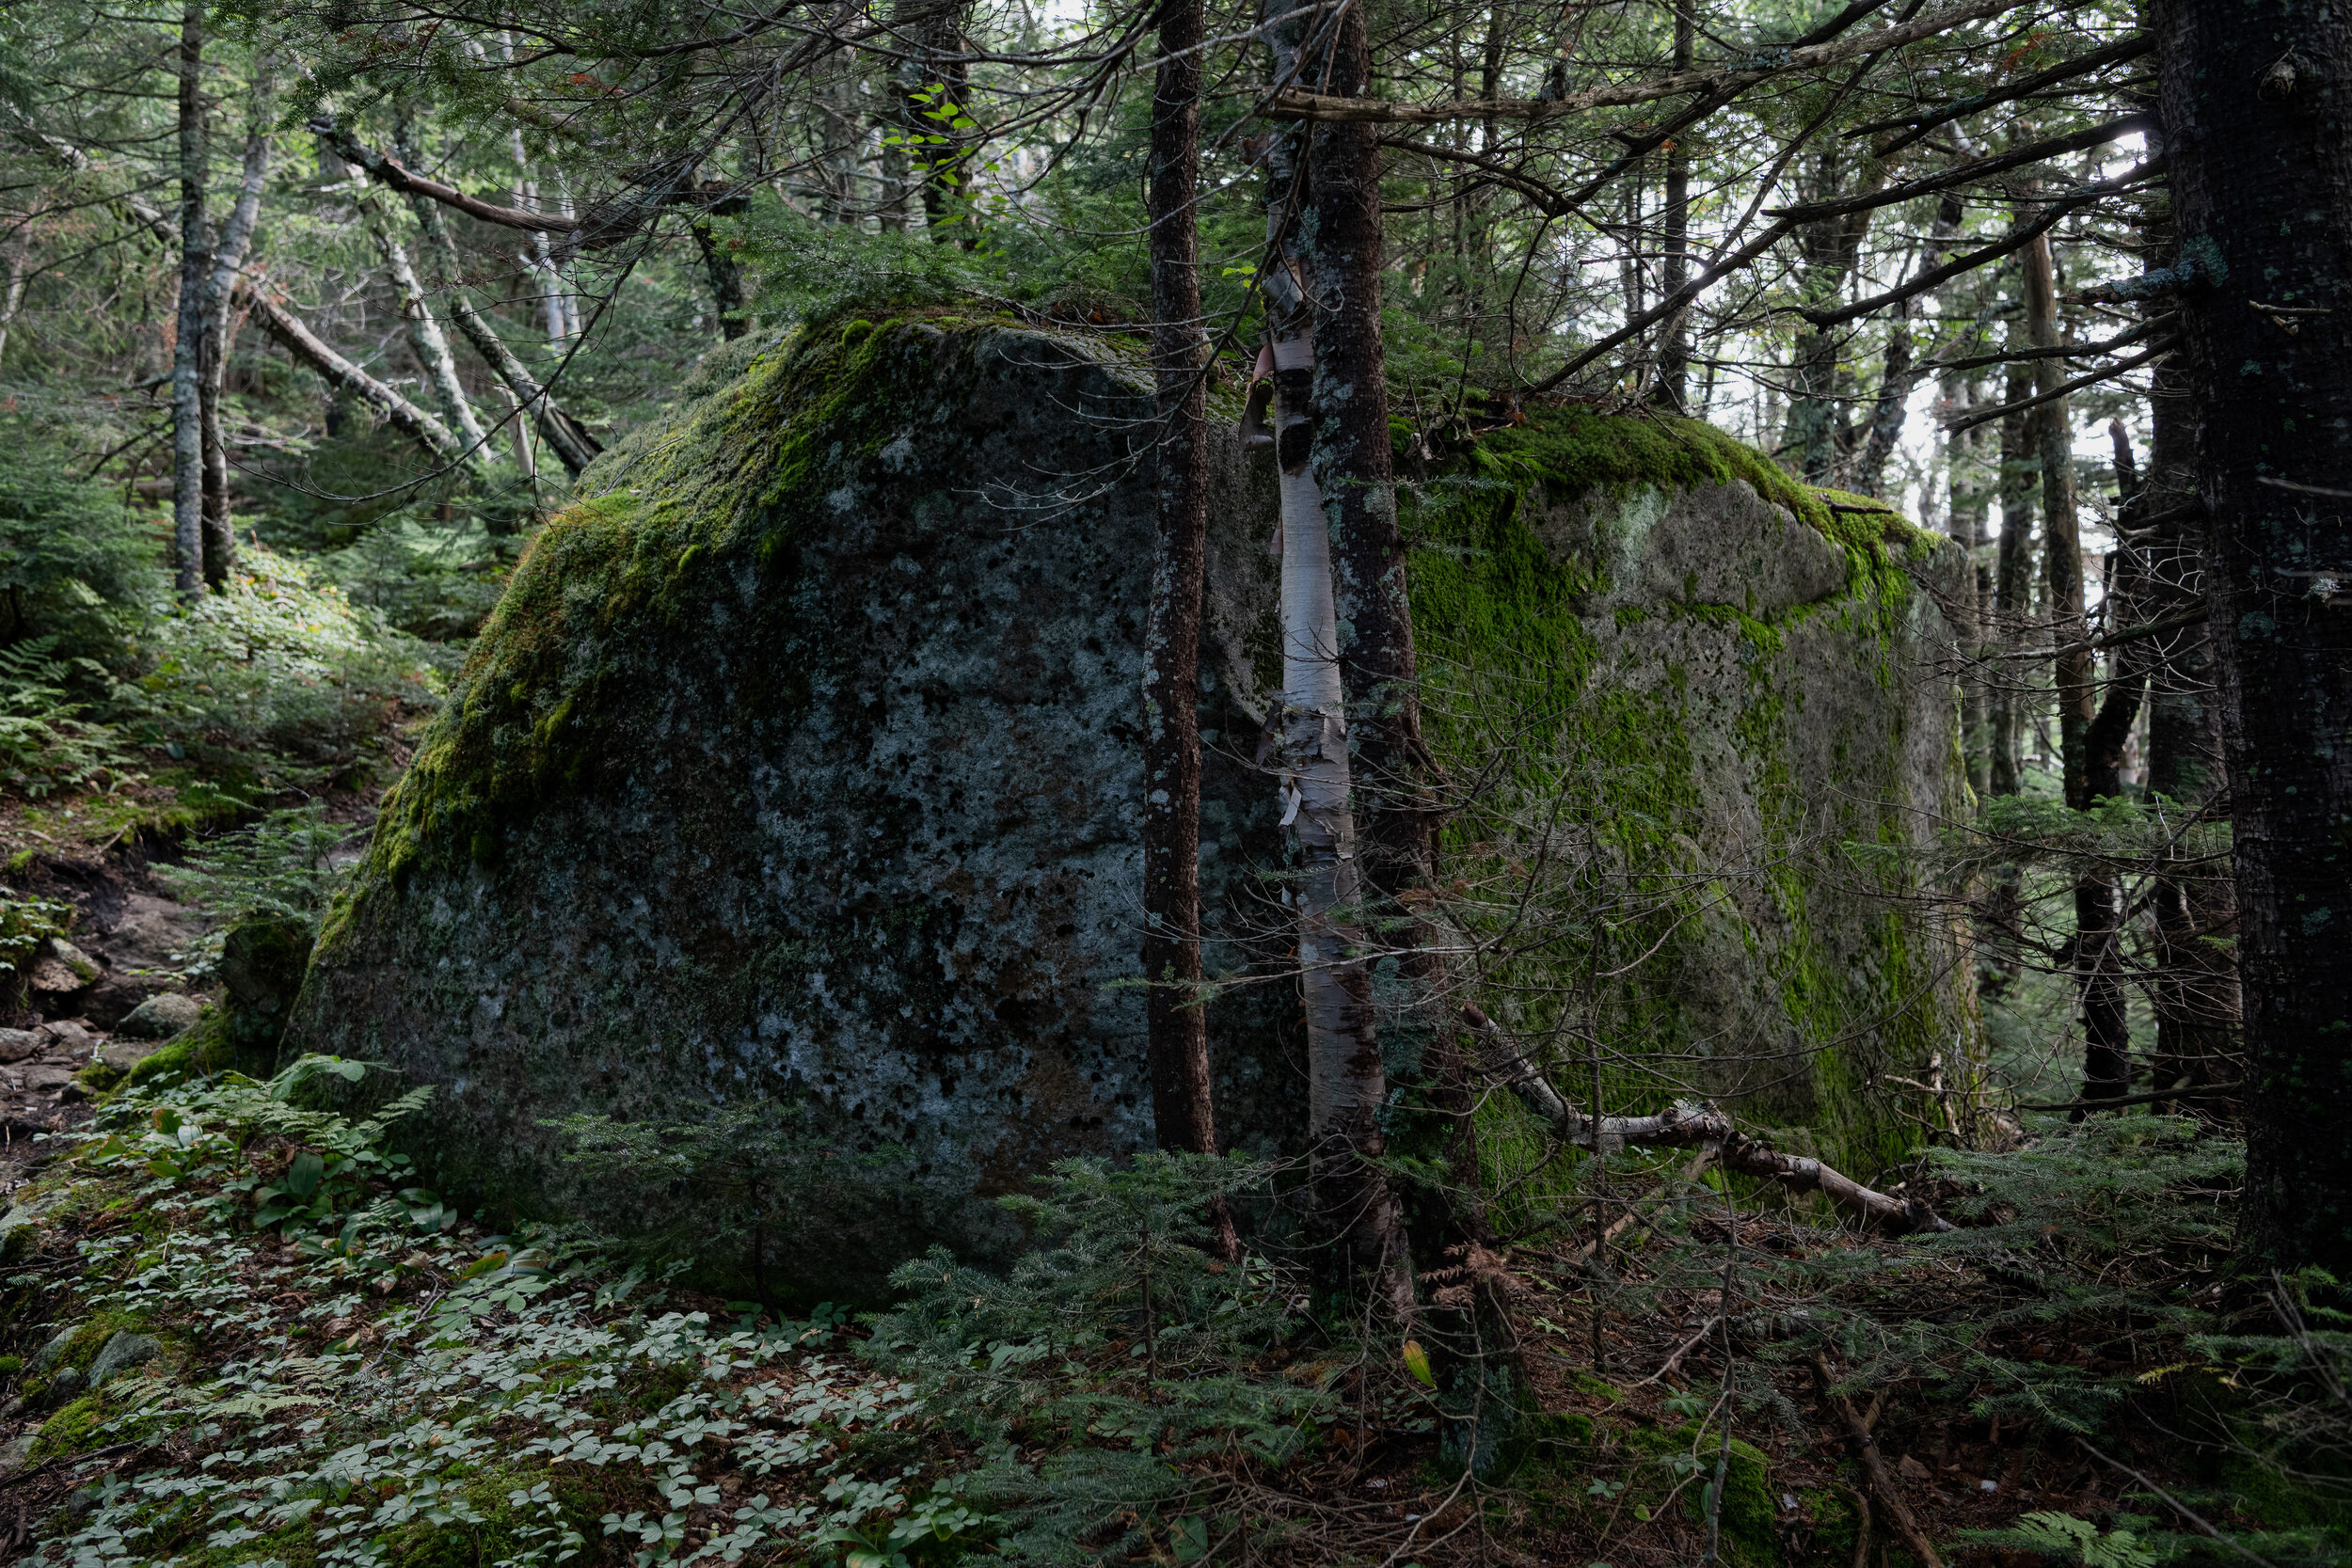 Rock covered by moss II - ADK Series, 2020